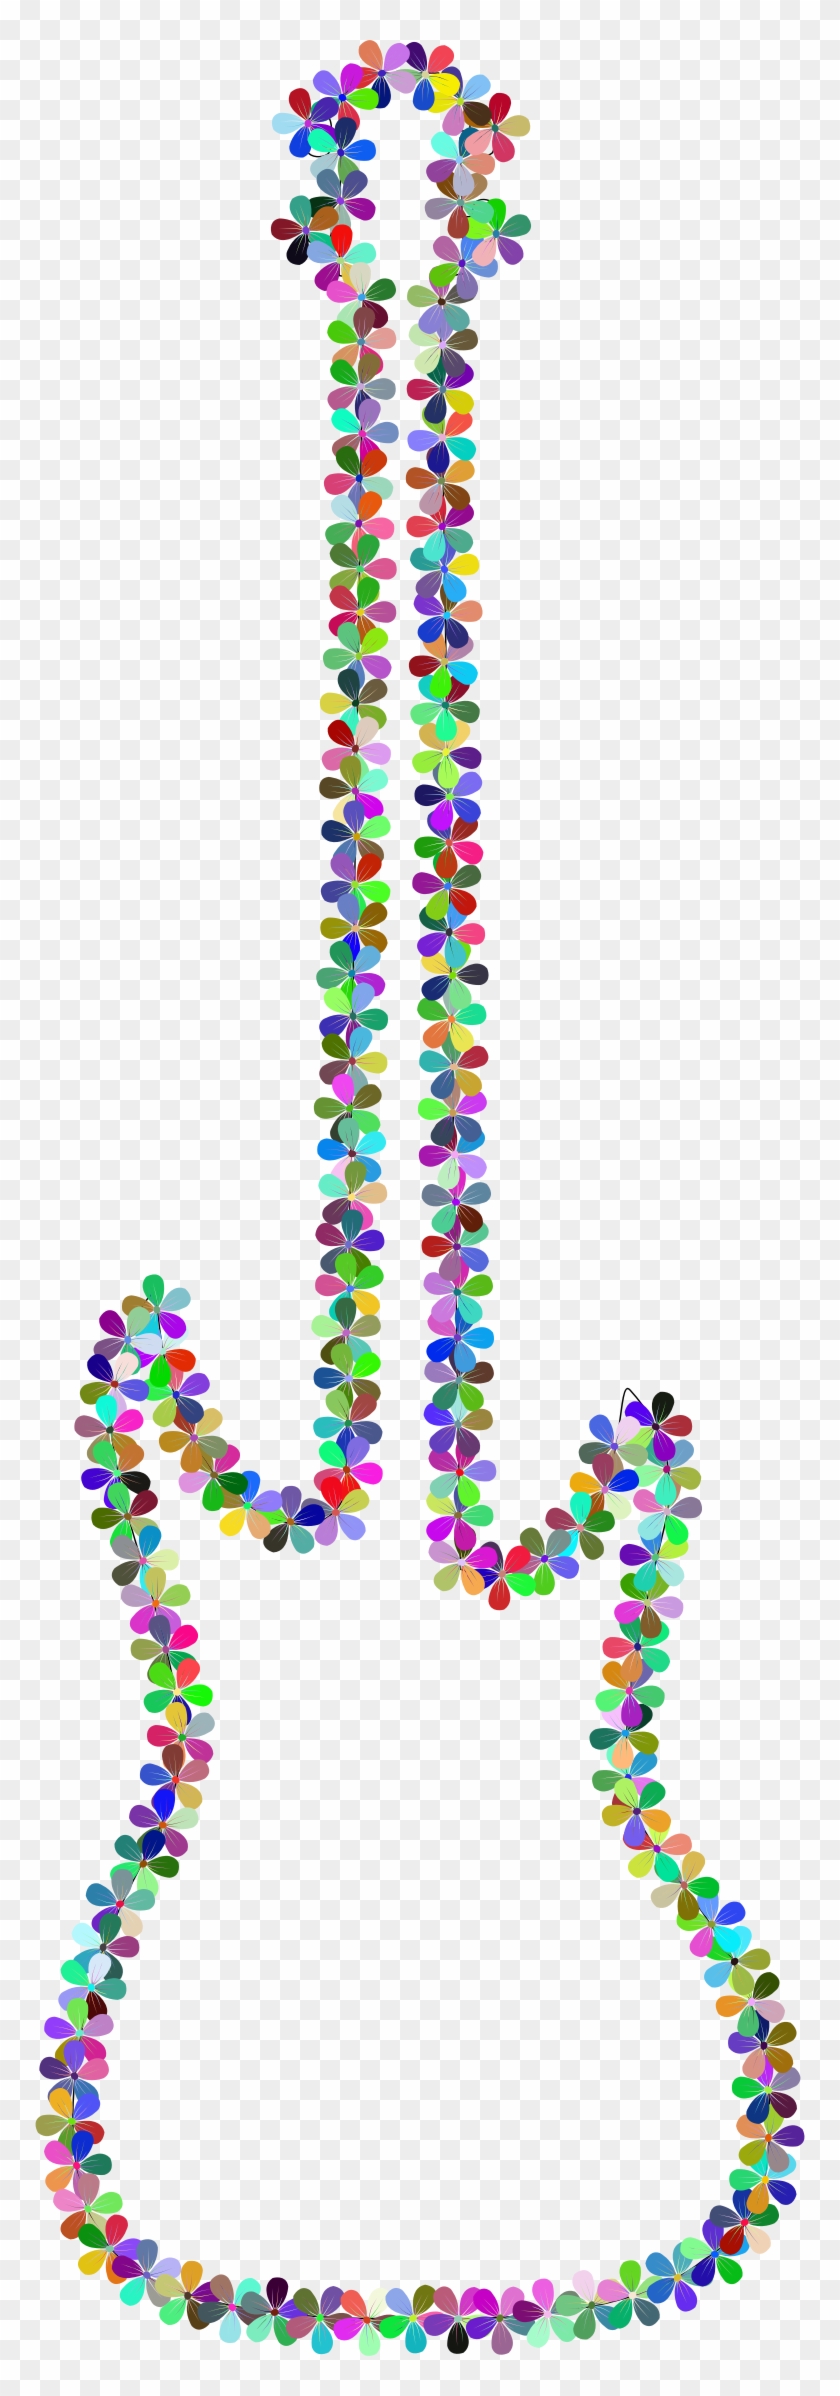 This Free Icons Png Design Of Prismatic Floral Guitar - This Free Icons Png Design Of Prismatic Floral Guitar #1264301